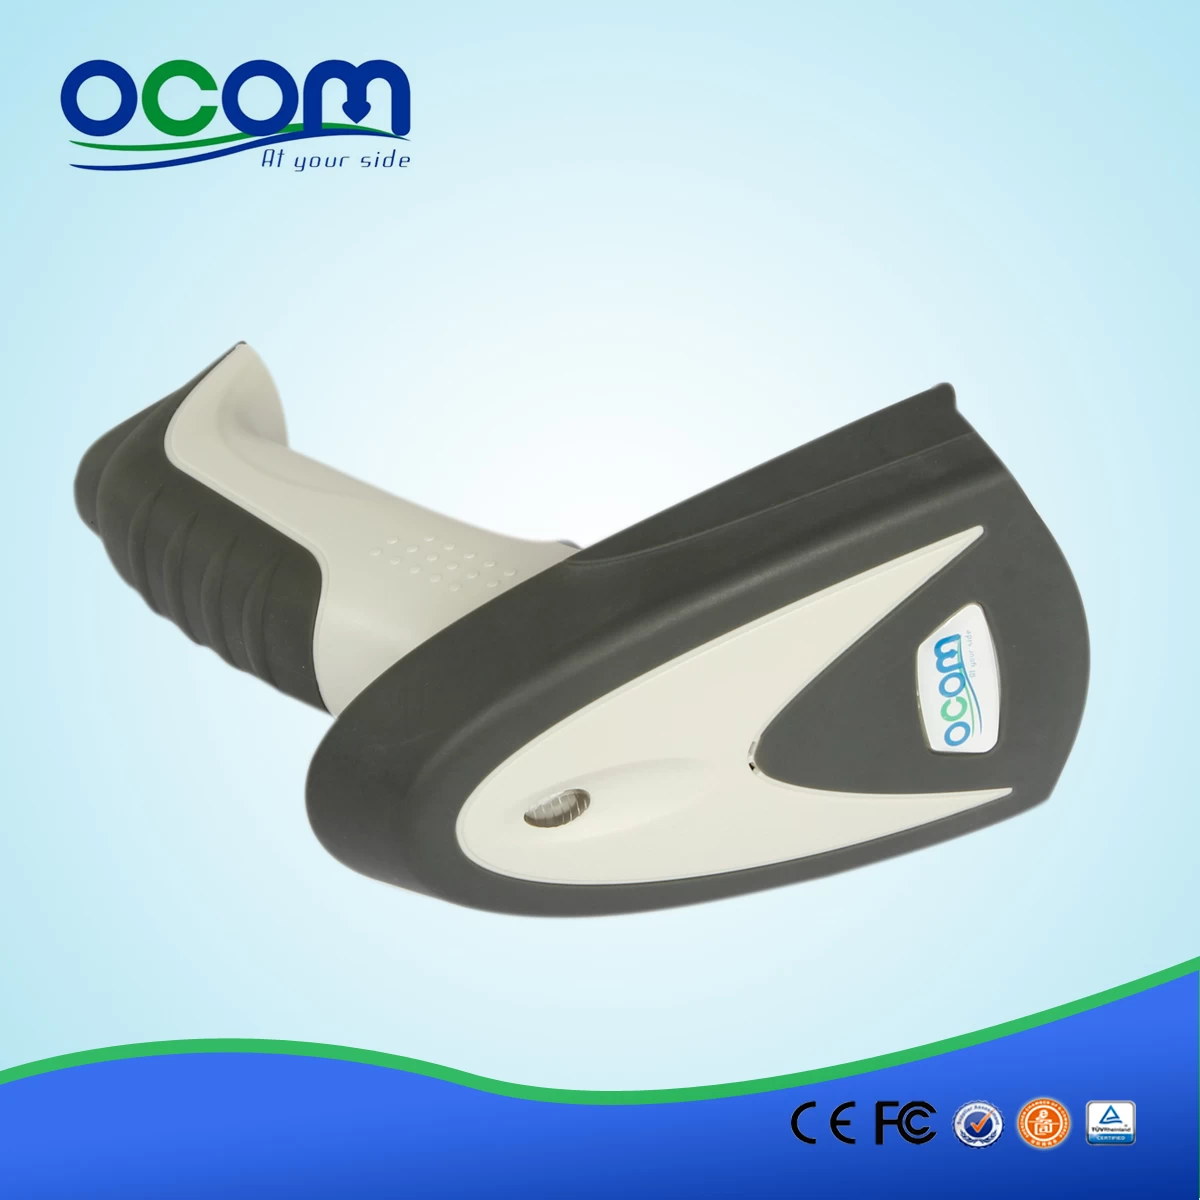 (OCBS-2002) 2d Android PDF417 Bar Code Scanner